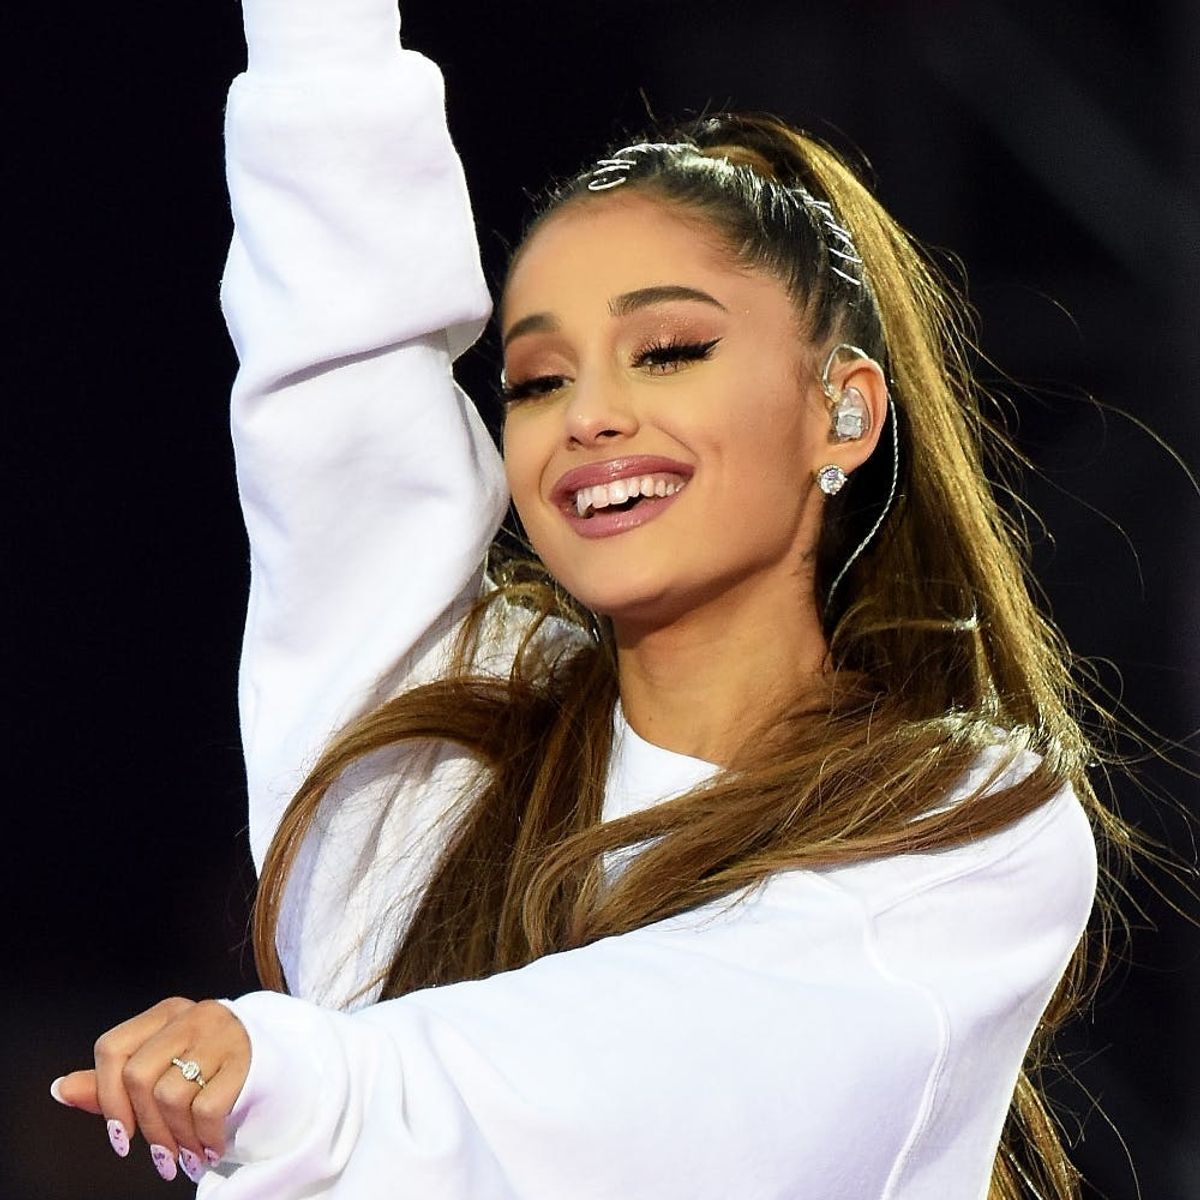 Ariana Grande Thanks Fans for “Wiping My Tears Away” in a New Heartfelt Message